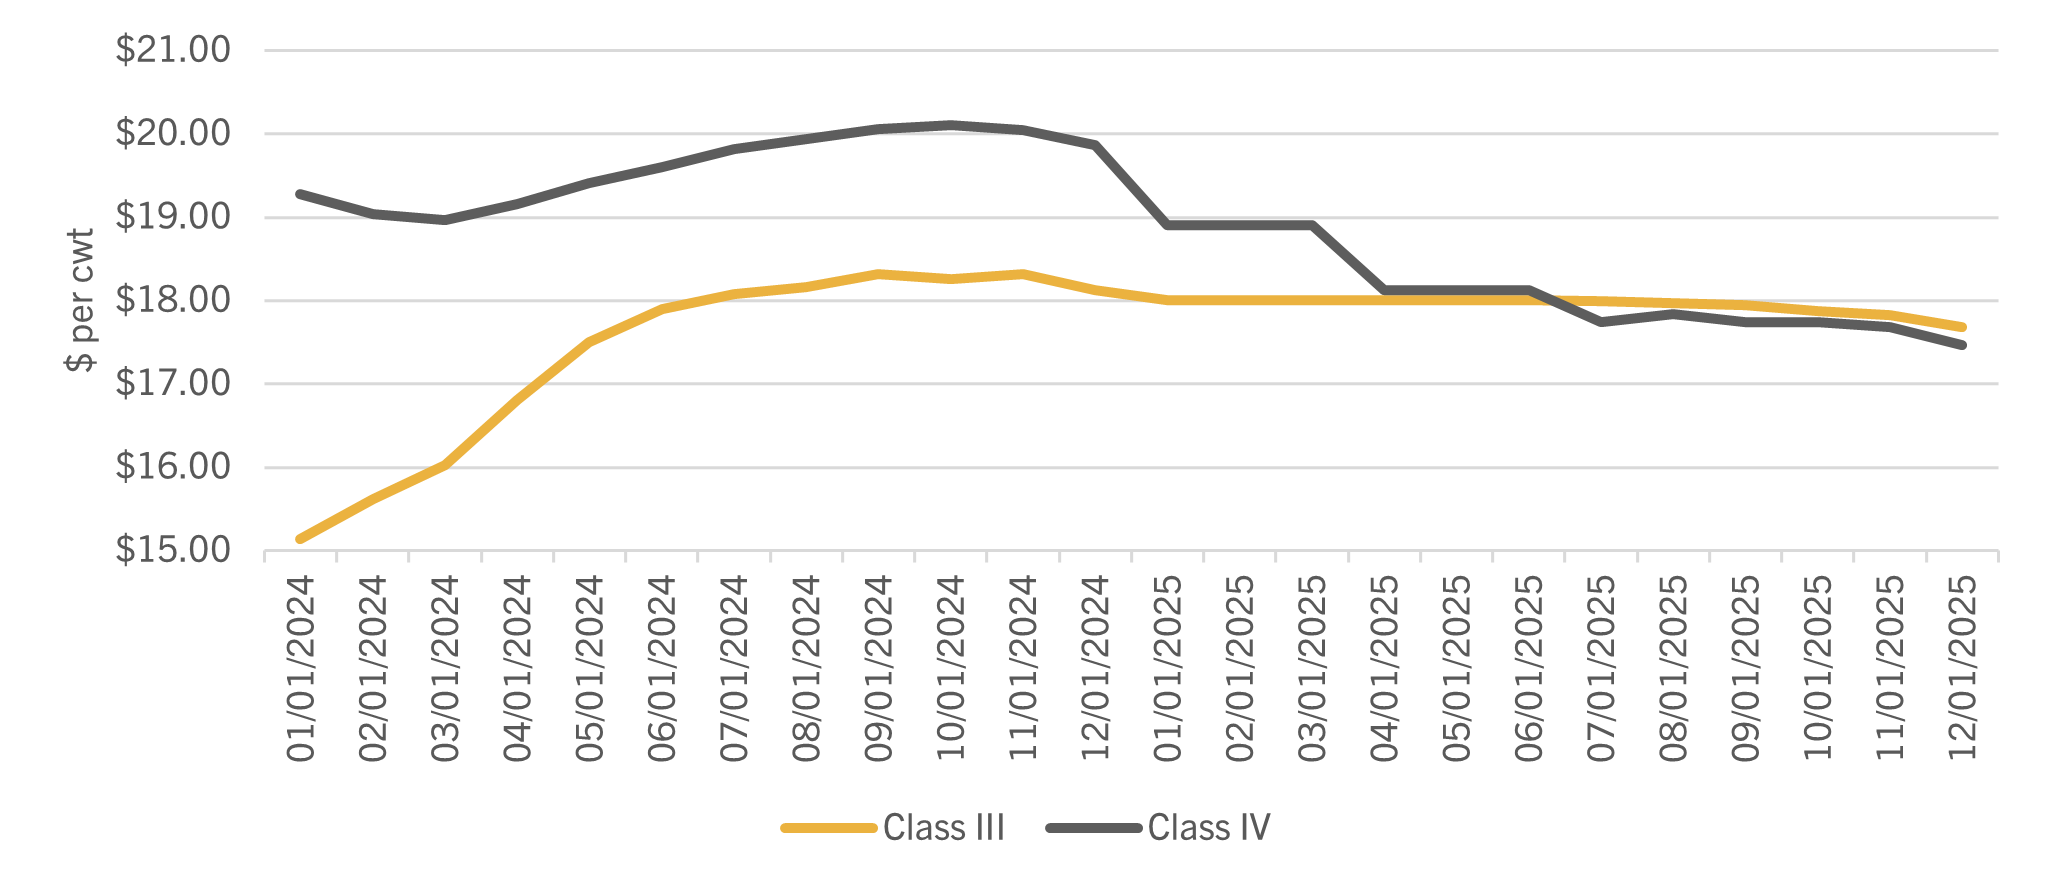 Class III and Class IV Futures Forward Curve